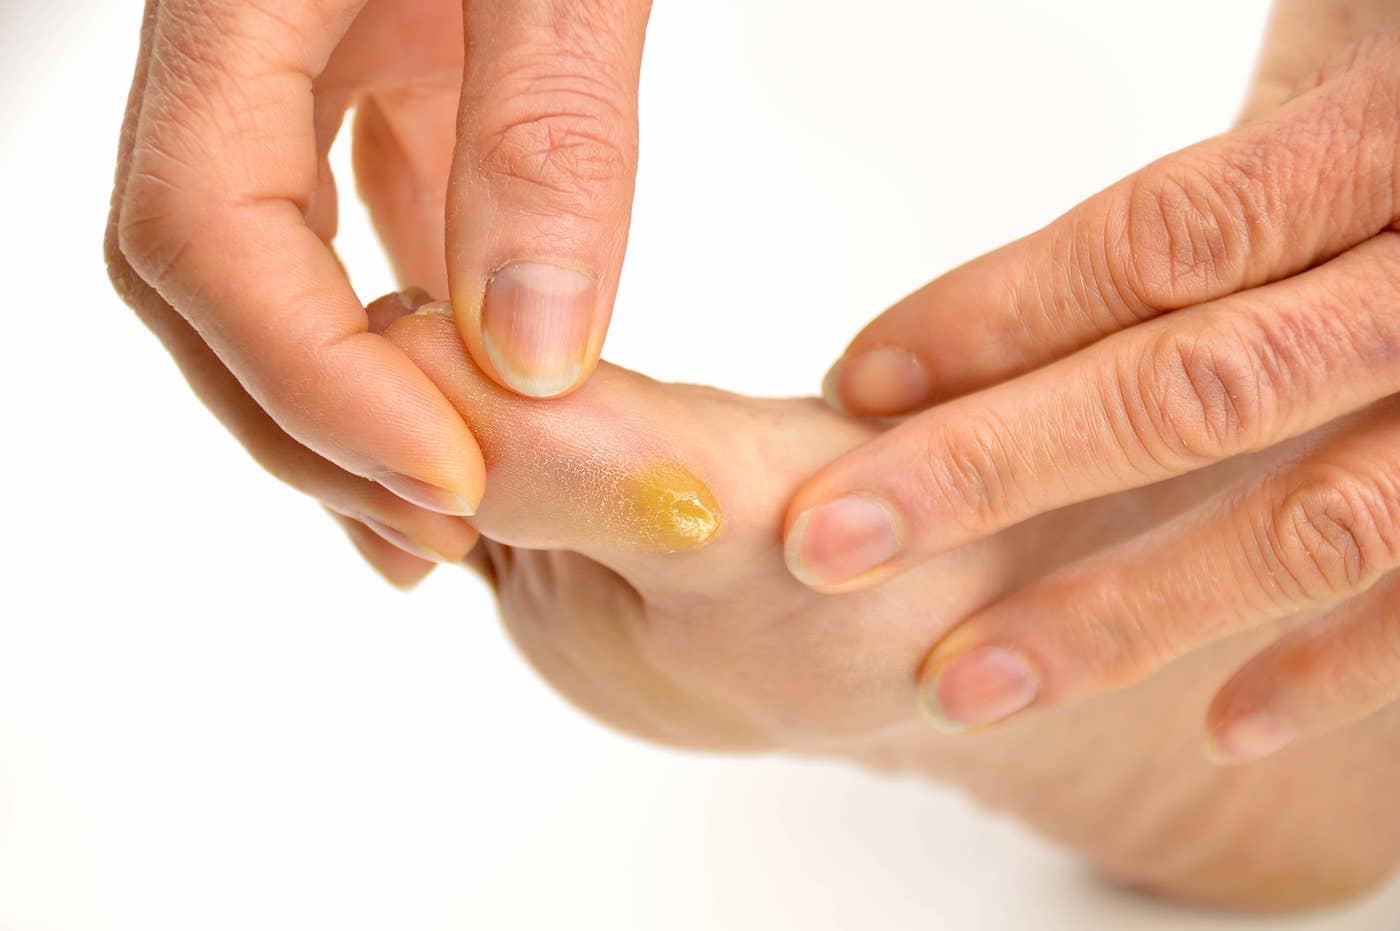 Plantar Callus: Is Complete Removal Possible?